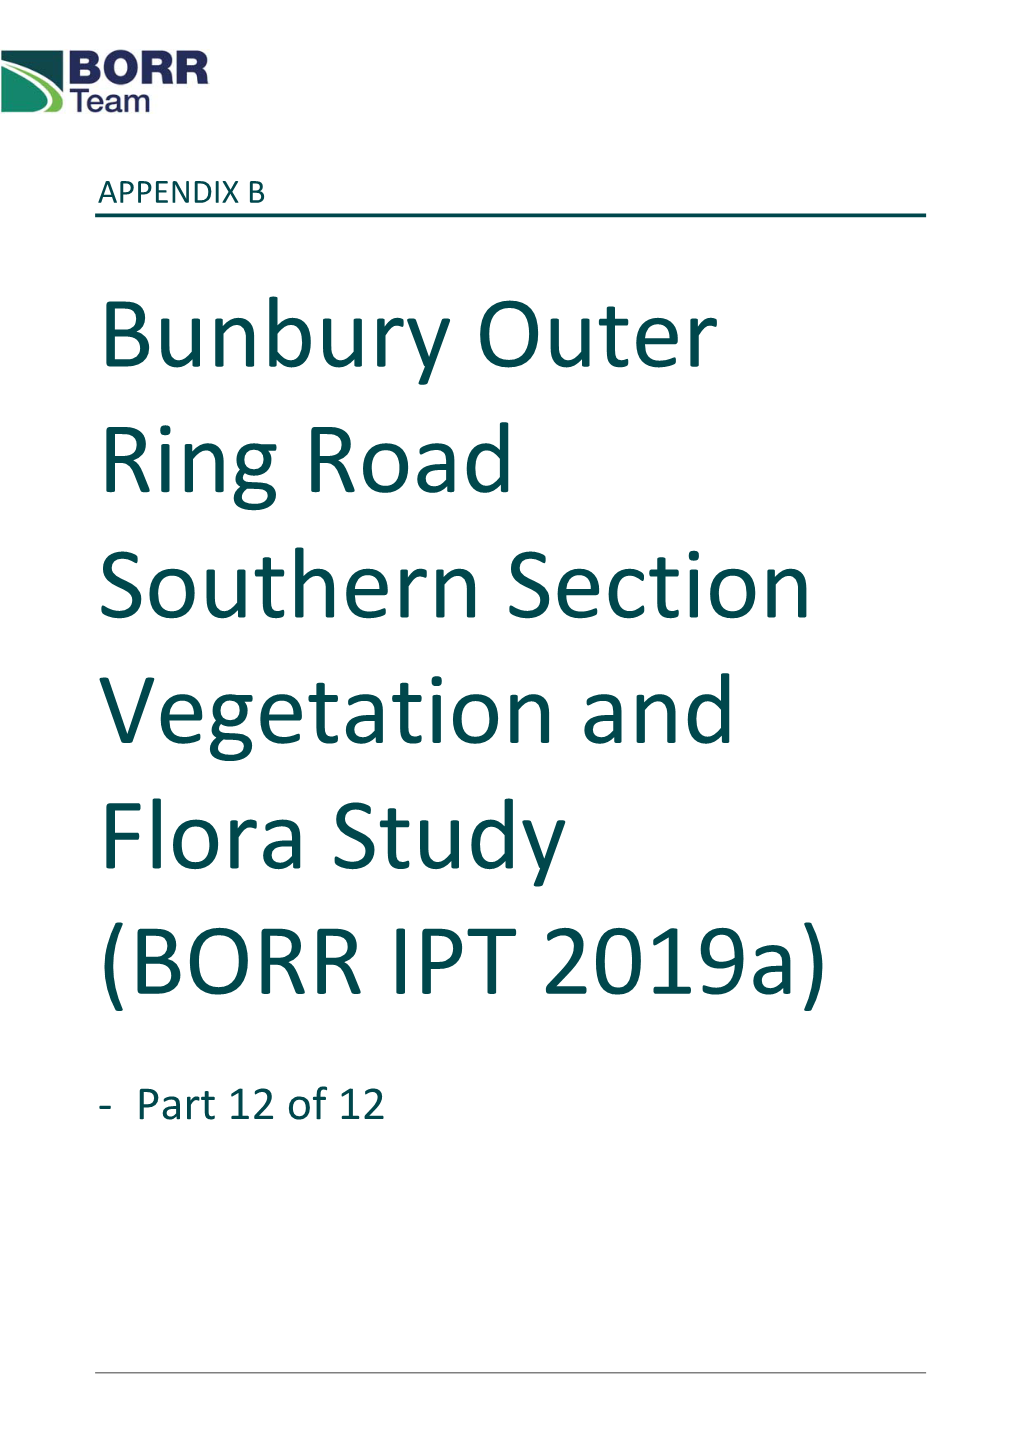 APPENDIX B Bunbury Outer Ring Road Southern Section Vegetation and Flora Study (BORR IPT 2019A)